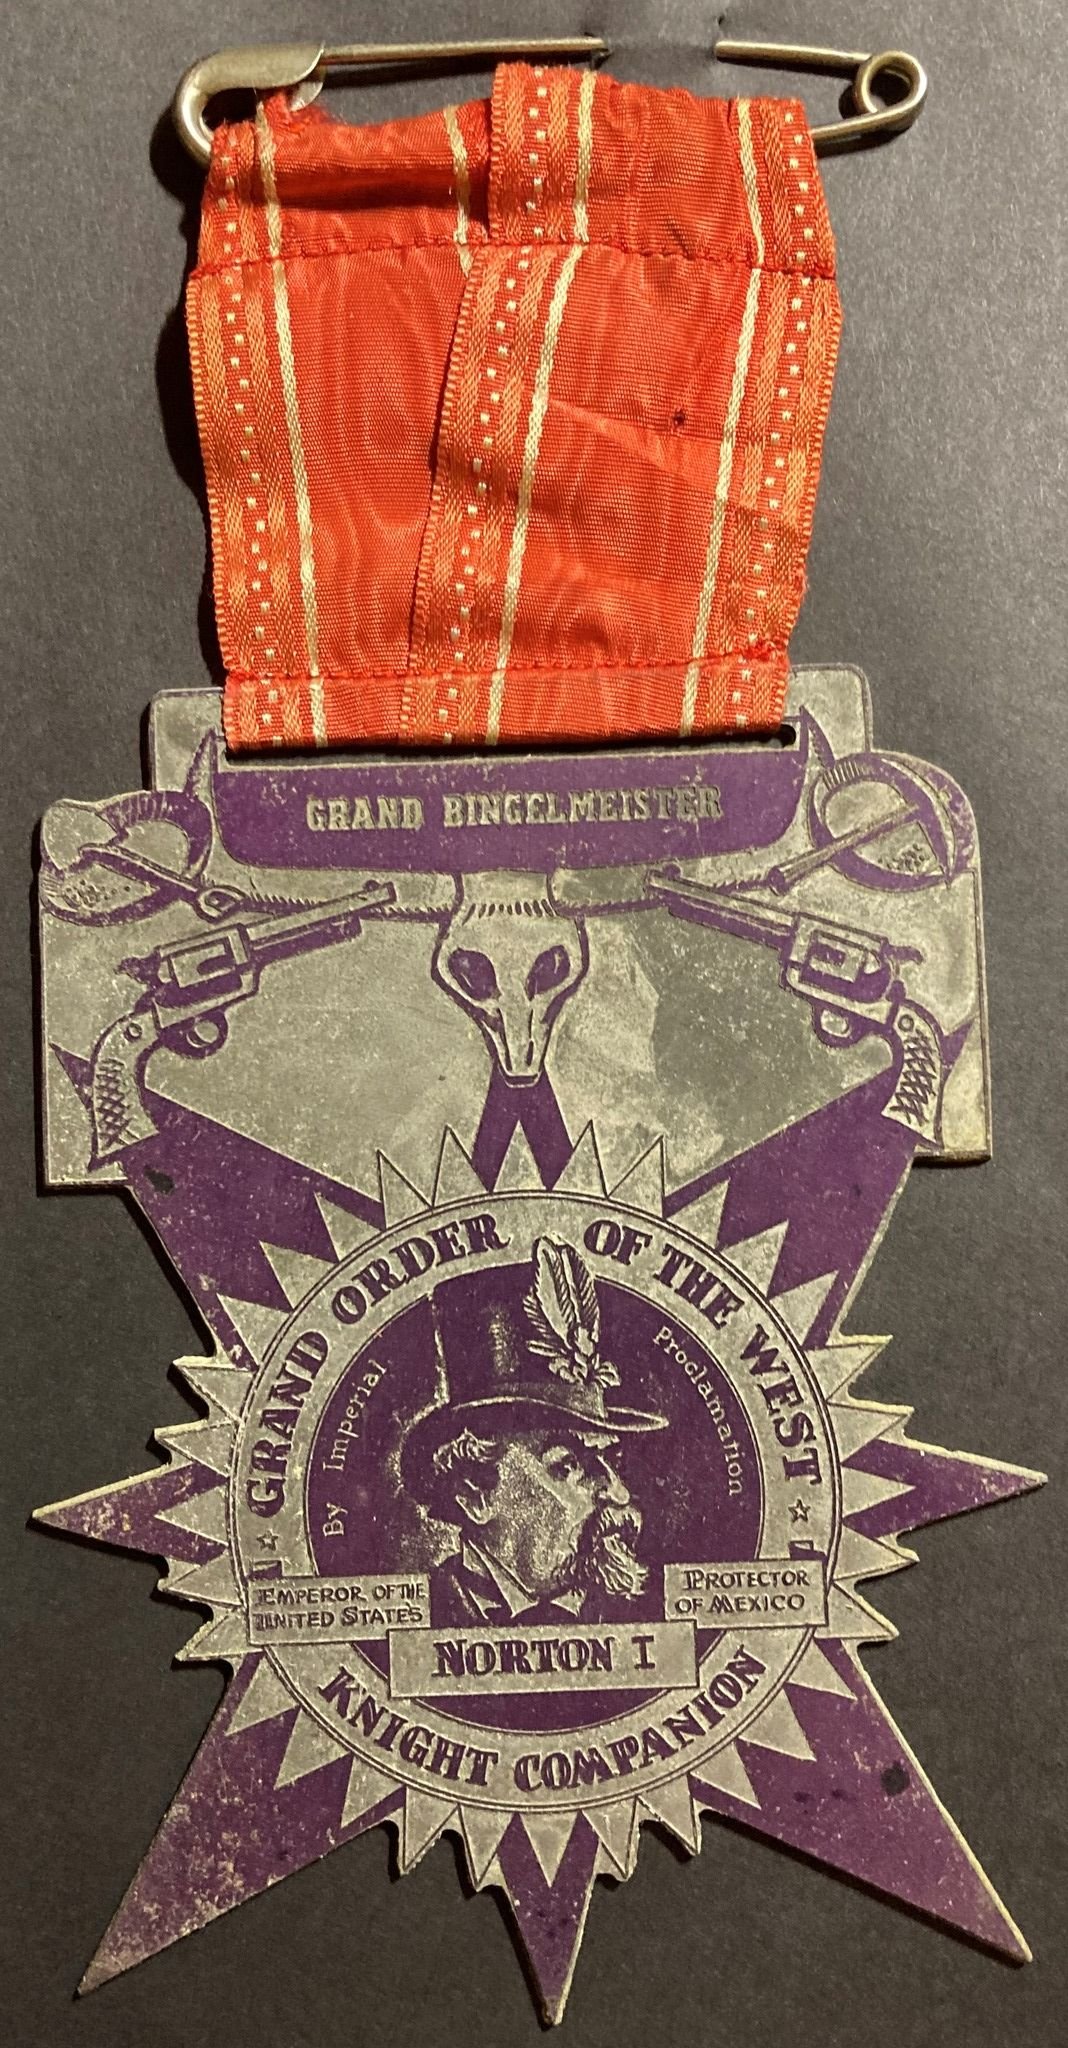   Grand Order of the West medal, unknown date.  7 1/2” long (including ribbon), 3 3/4” wide. Secondary texts: “Knight Companion” and “Grand Bingelheimer.” Norton artwork the same as for  this promotional souvenir  produced by the  San Francisco Chron